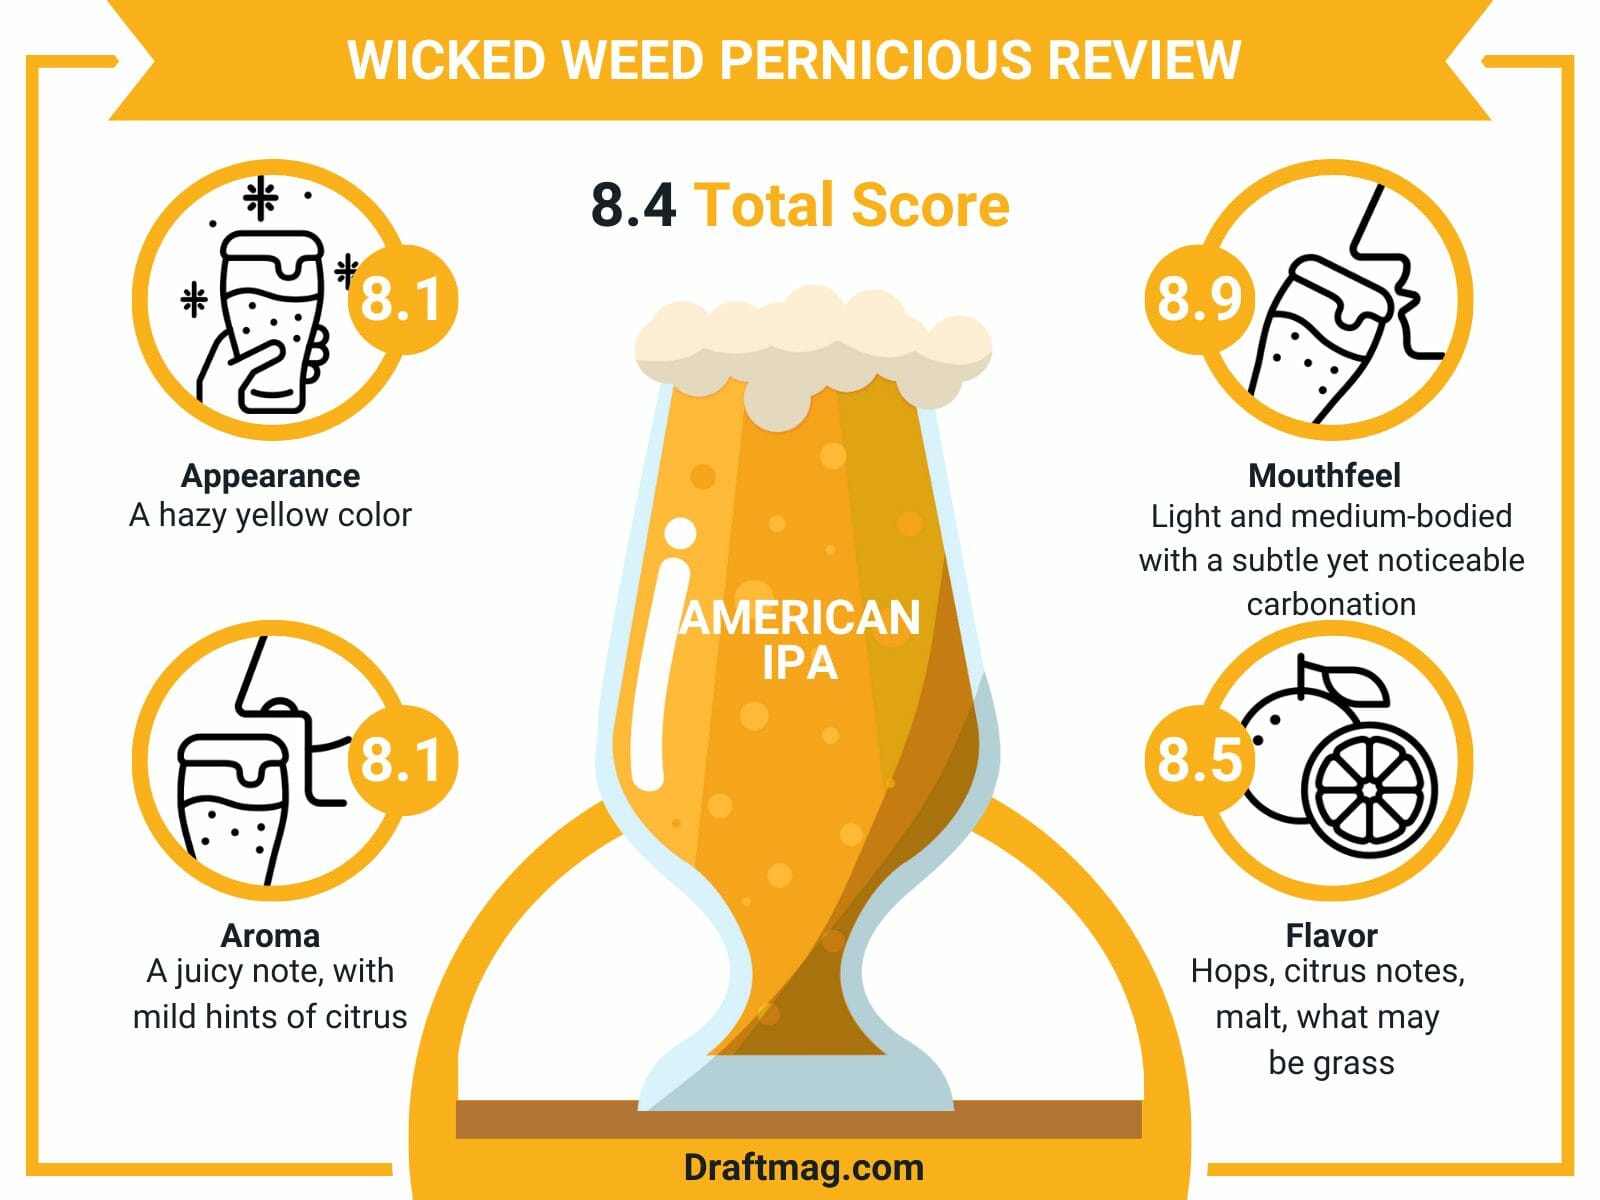 Wicked weed pernicious review infographic